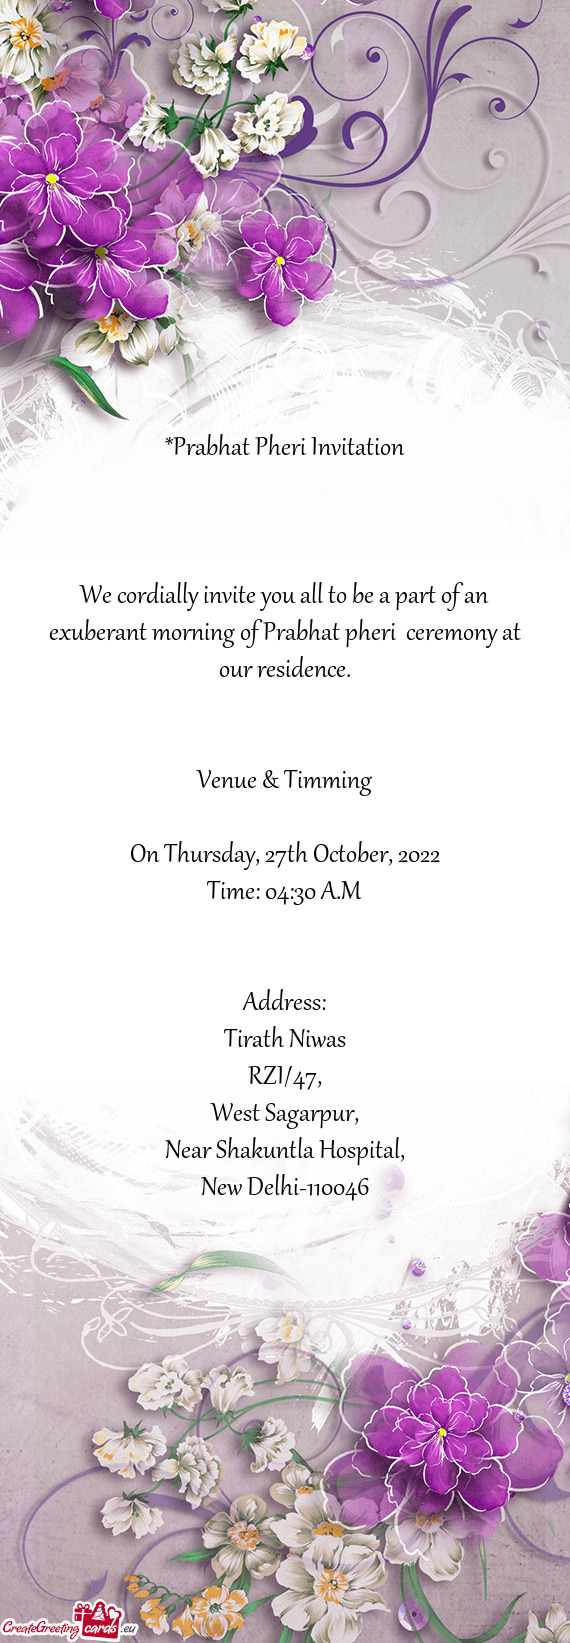 We cordially invite you all to be a part of an exuberant morning of Prabhat pheri ceremony at our r